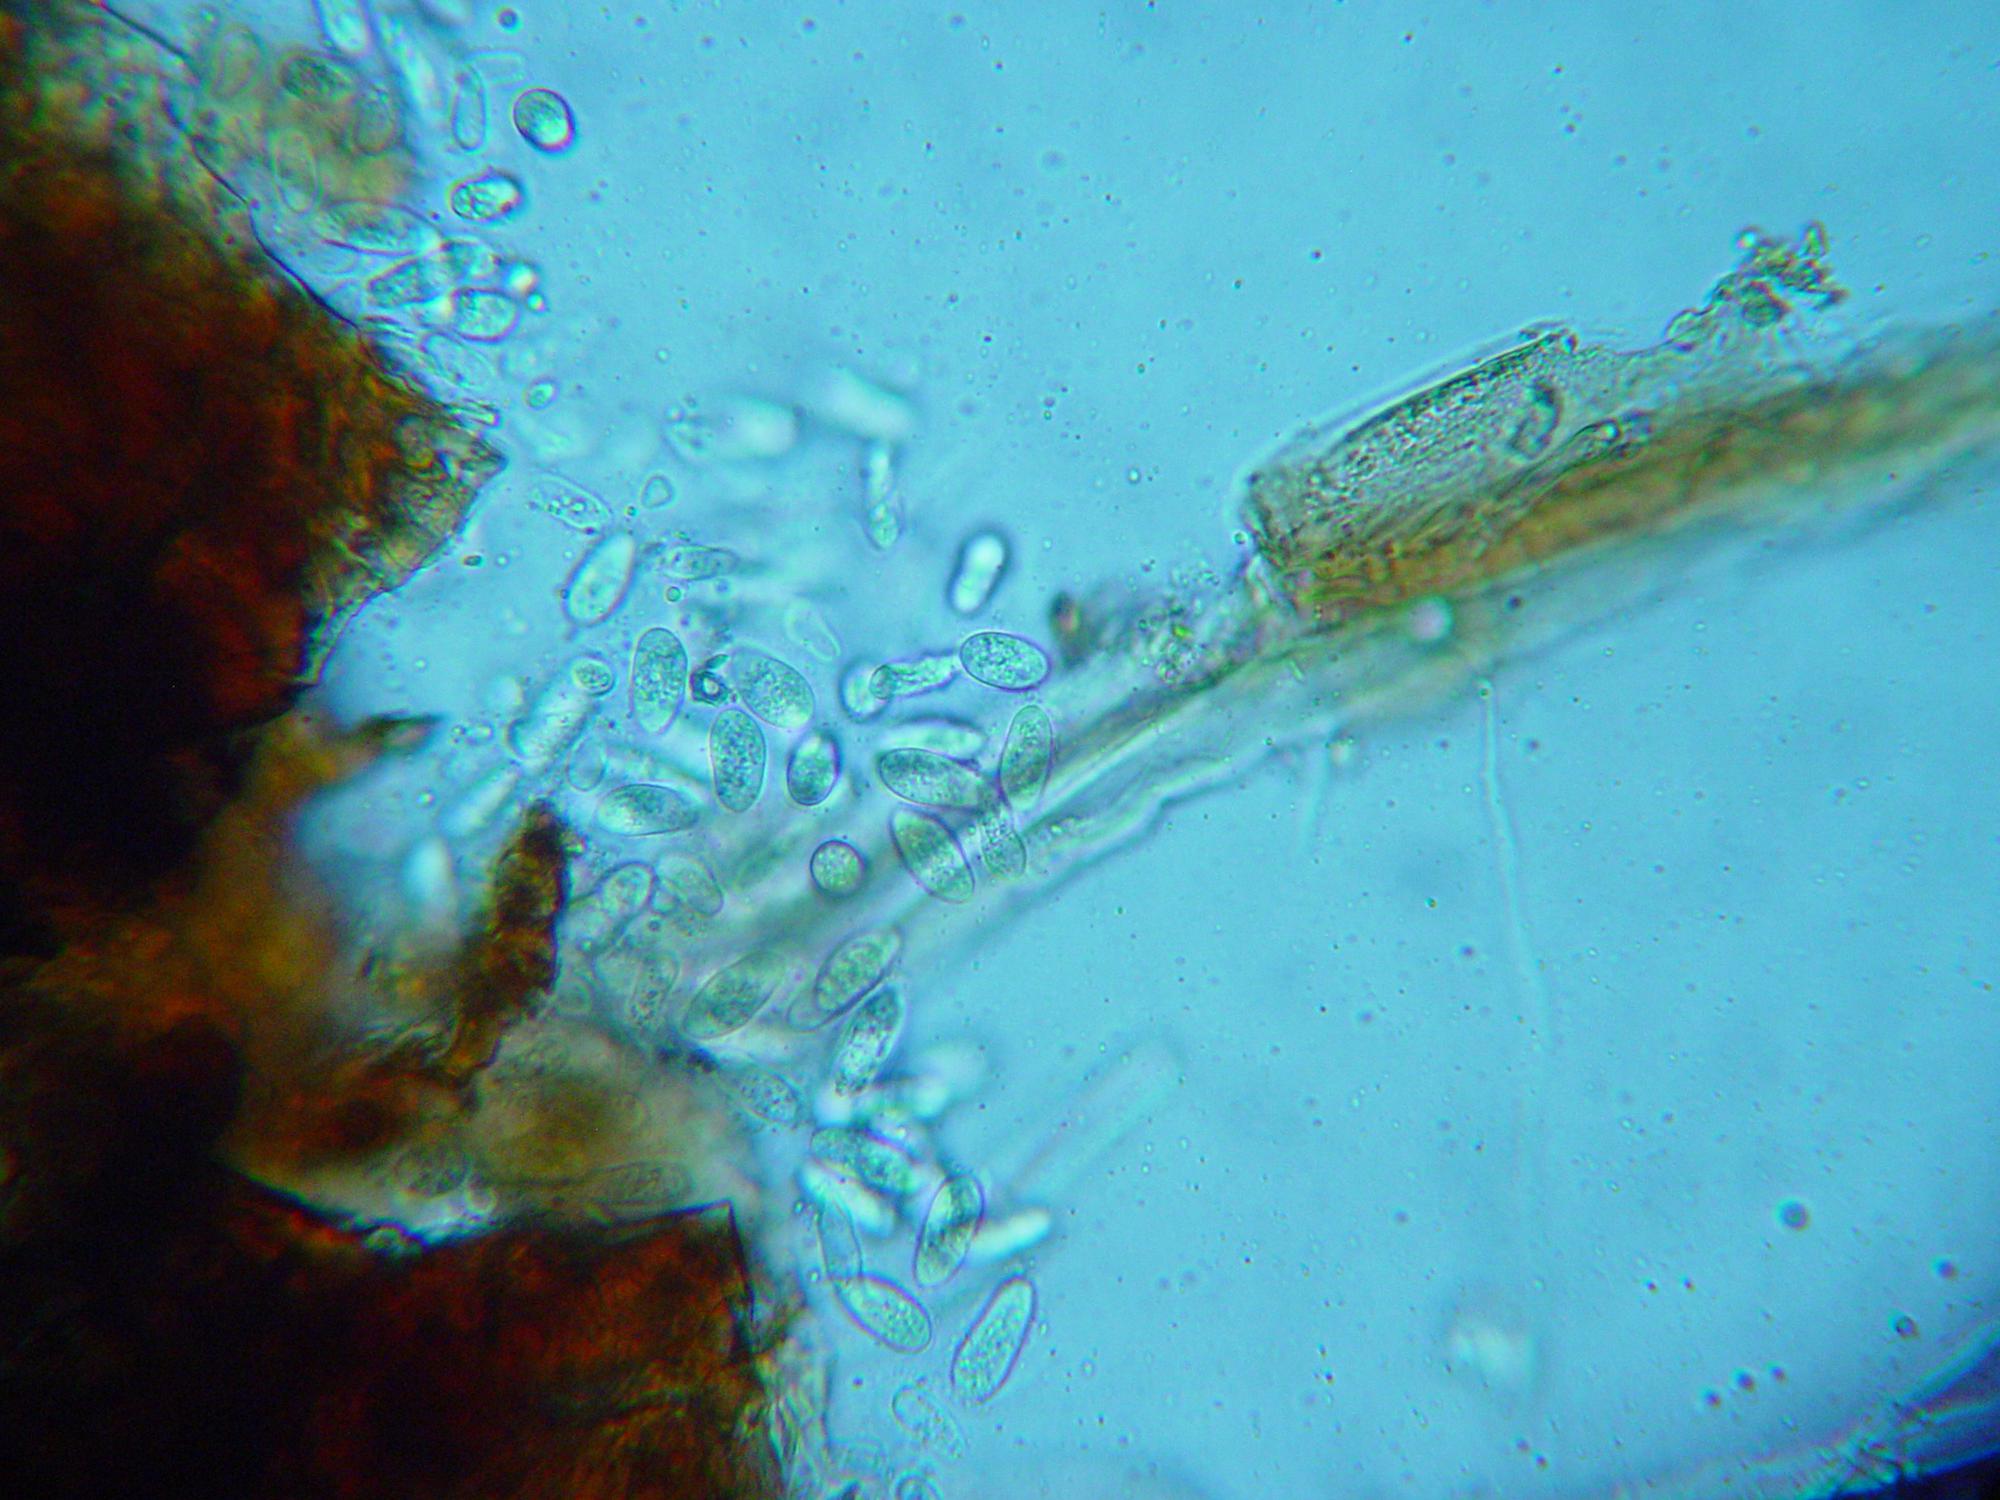 Spores of the Macrophomina phaseolina pathogen can be seen as transparent ovals in this microscopic image taken from an infected SunPatiens plant. (Photo by MSU Extension Service/ Clarissa Balbalian)